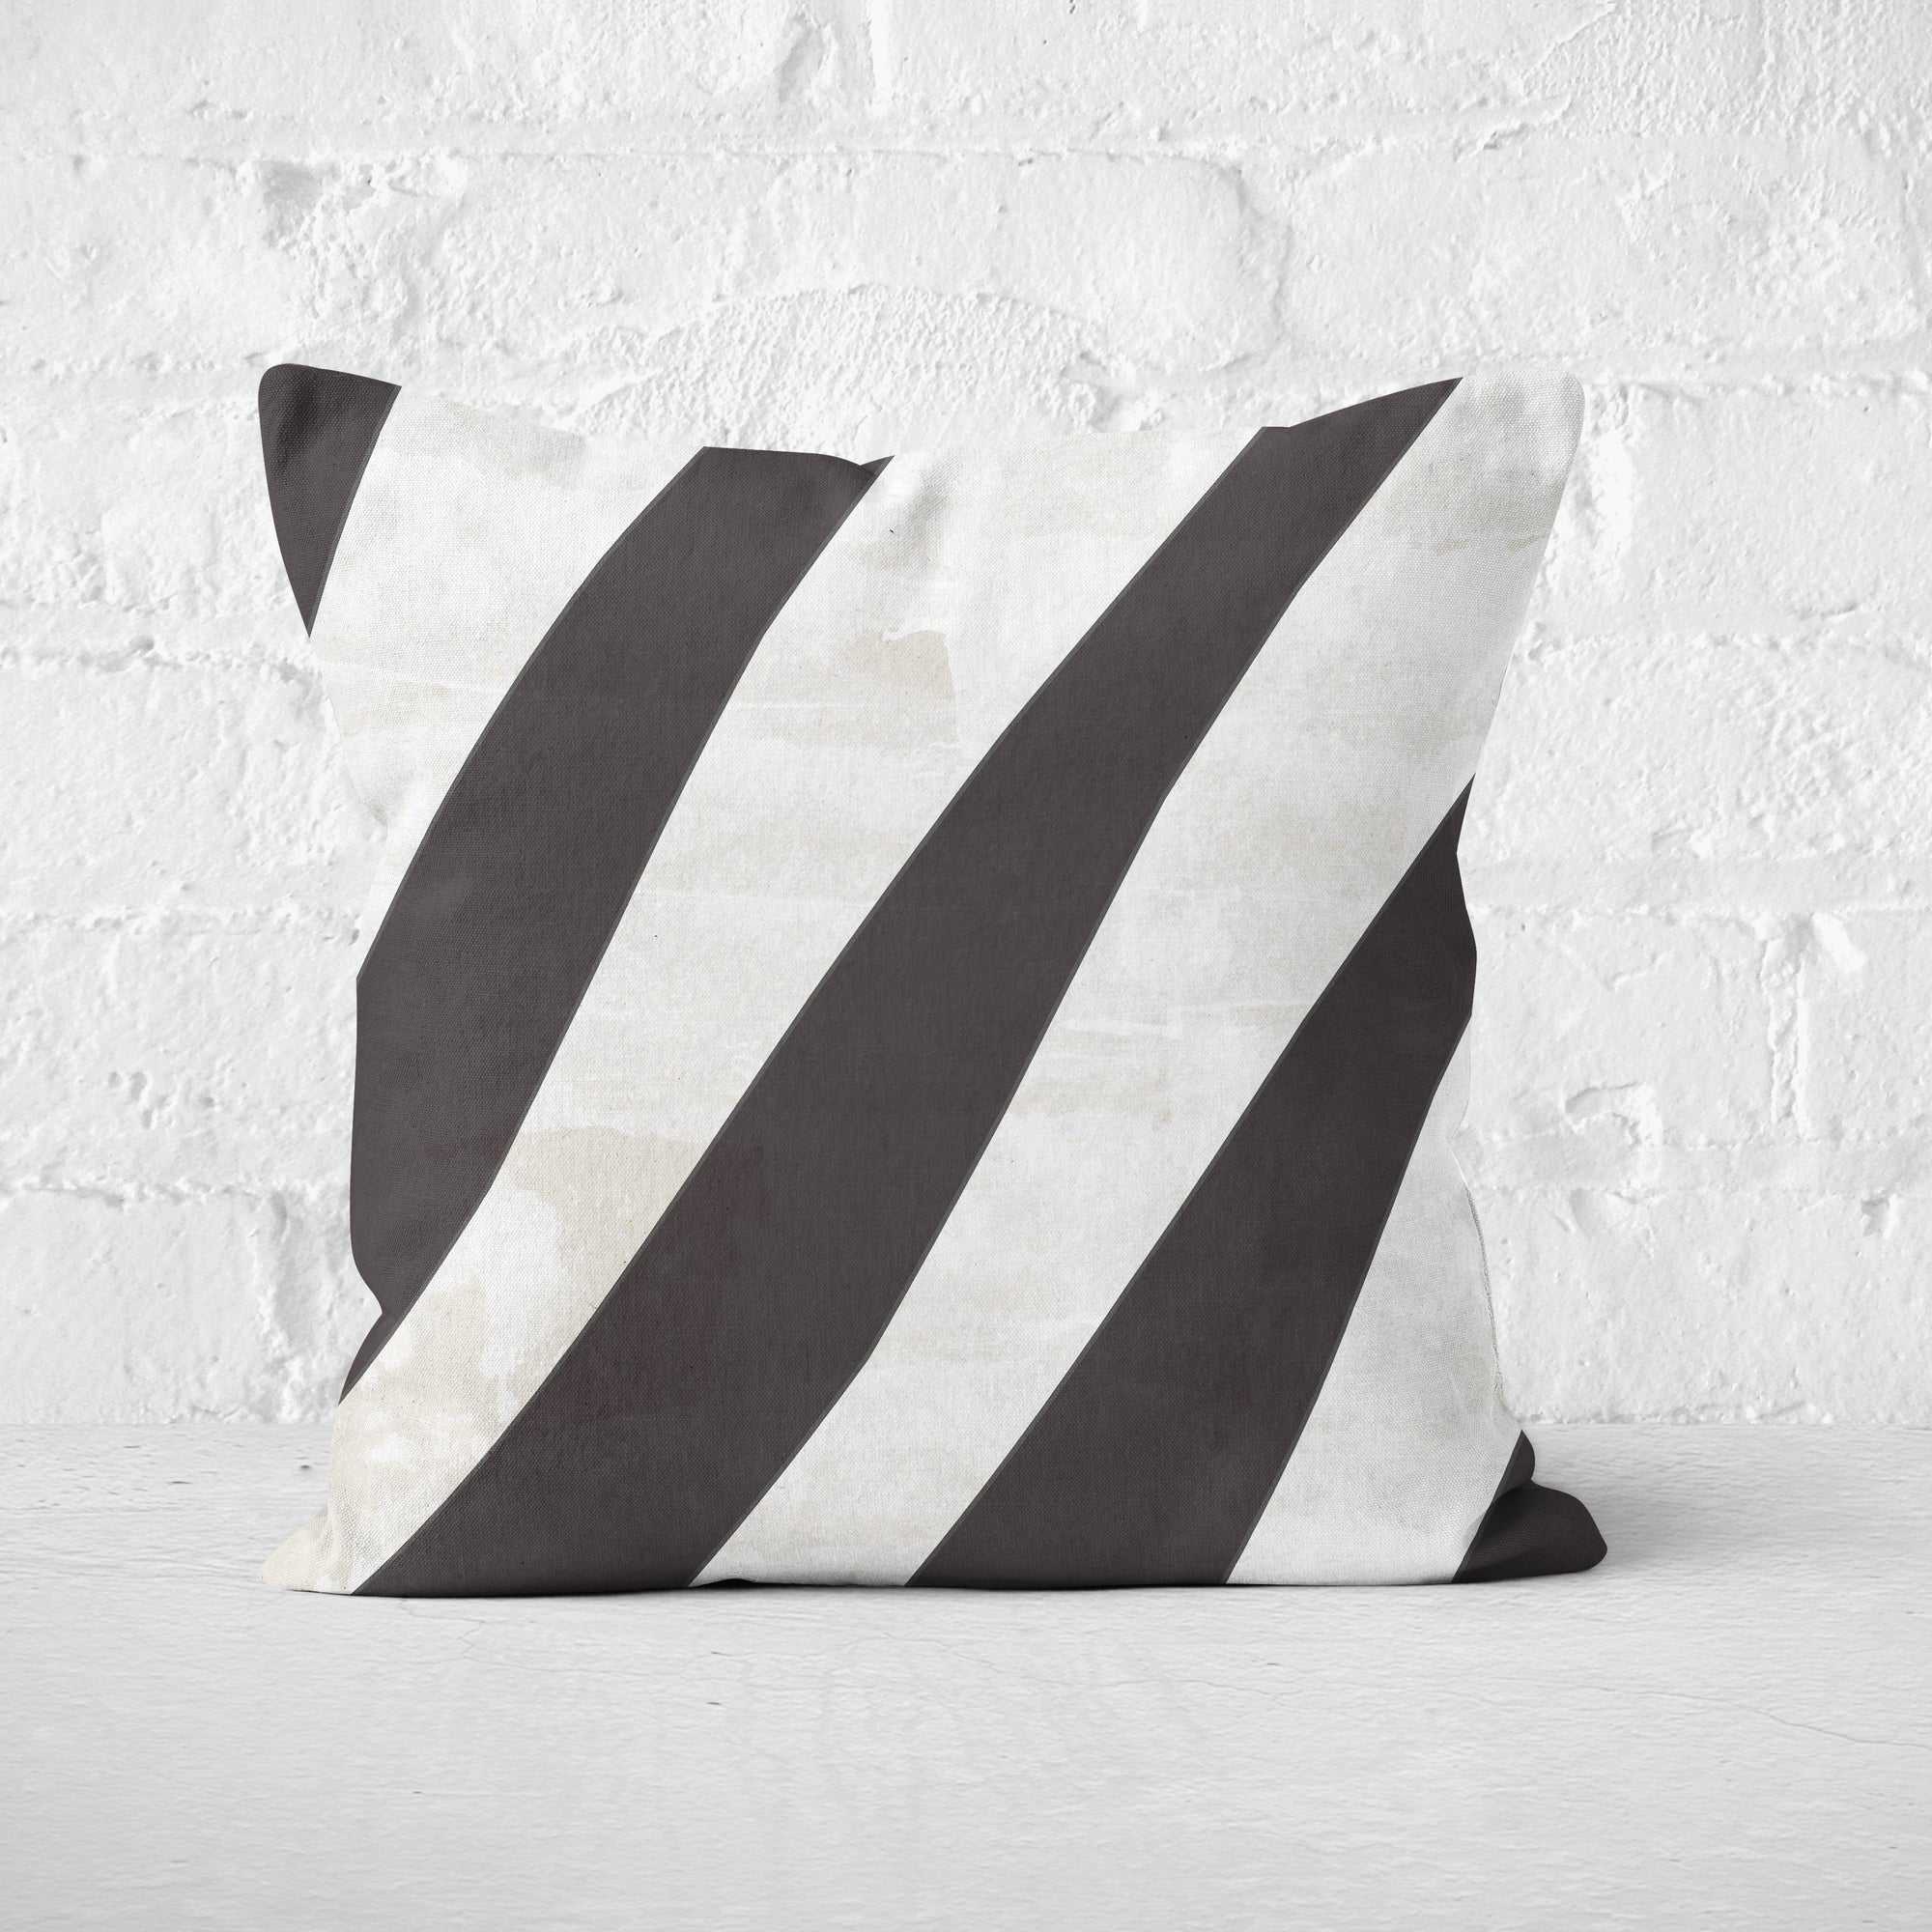 Pillow Cover Art Feature 'Contours' - White & Dark Brown - Cotton Twill